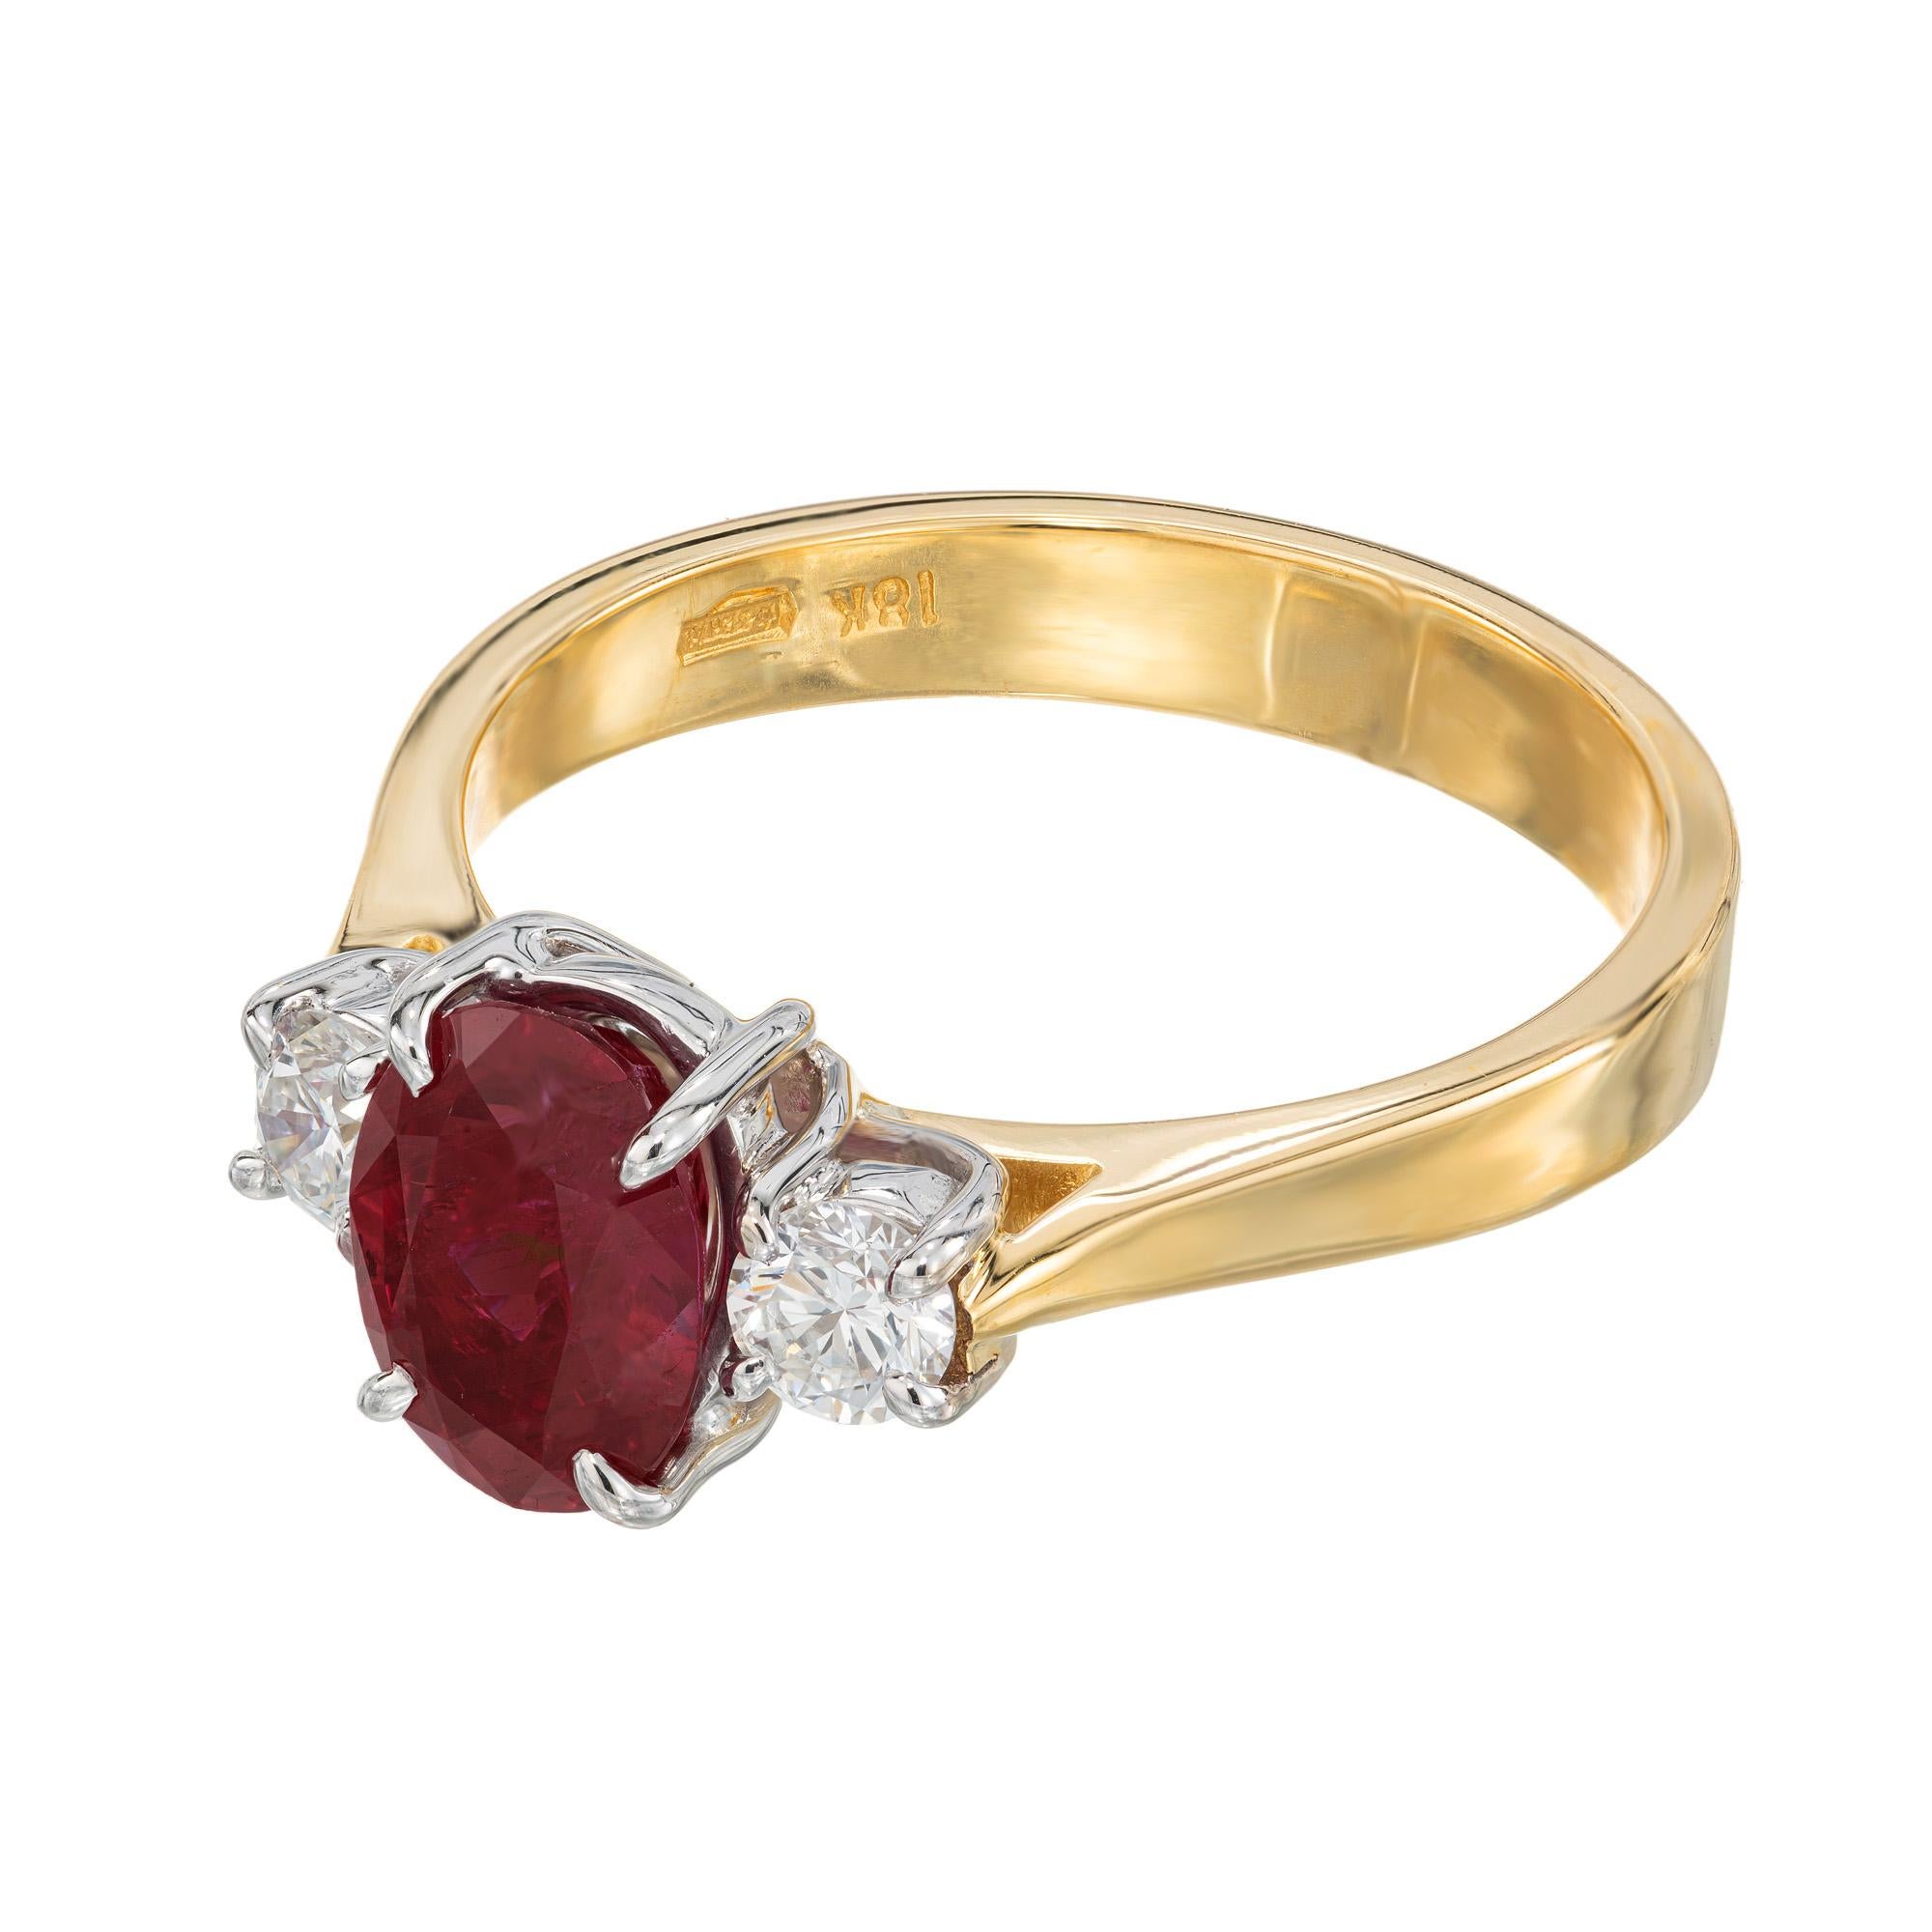 GIA Certified 1.30 Carat Ruby Diamond Two Tone Gold Engagement Ring. This remarkable ring showcases a stunning 1.30 carat oval ruby gemstone, flanked by 2 dazzling round cut diamonds, all set in an elegant two-tone 14k yellow and white gold setting.